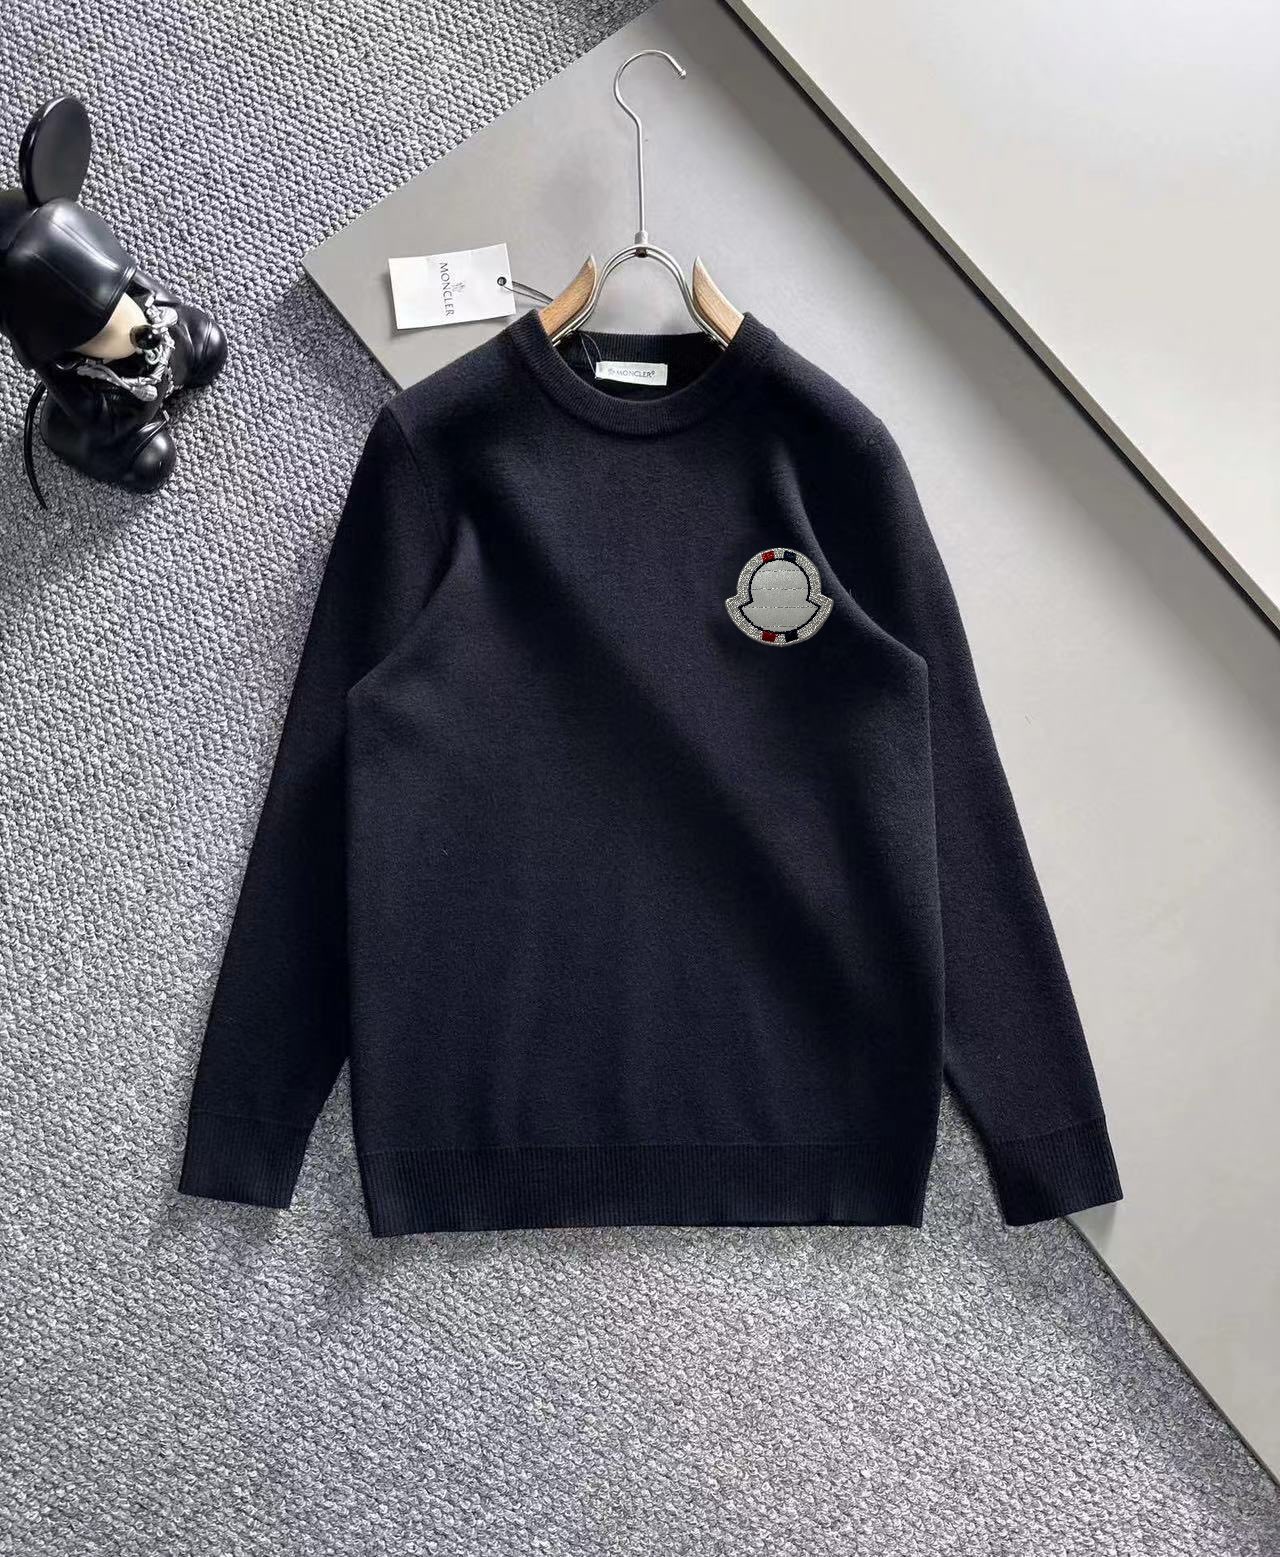 Moncler Clothing Sweatshirts Splicing Fall/Winter Collection Fashion Casual